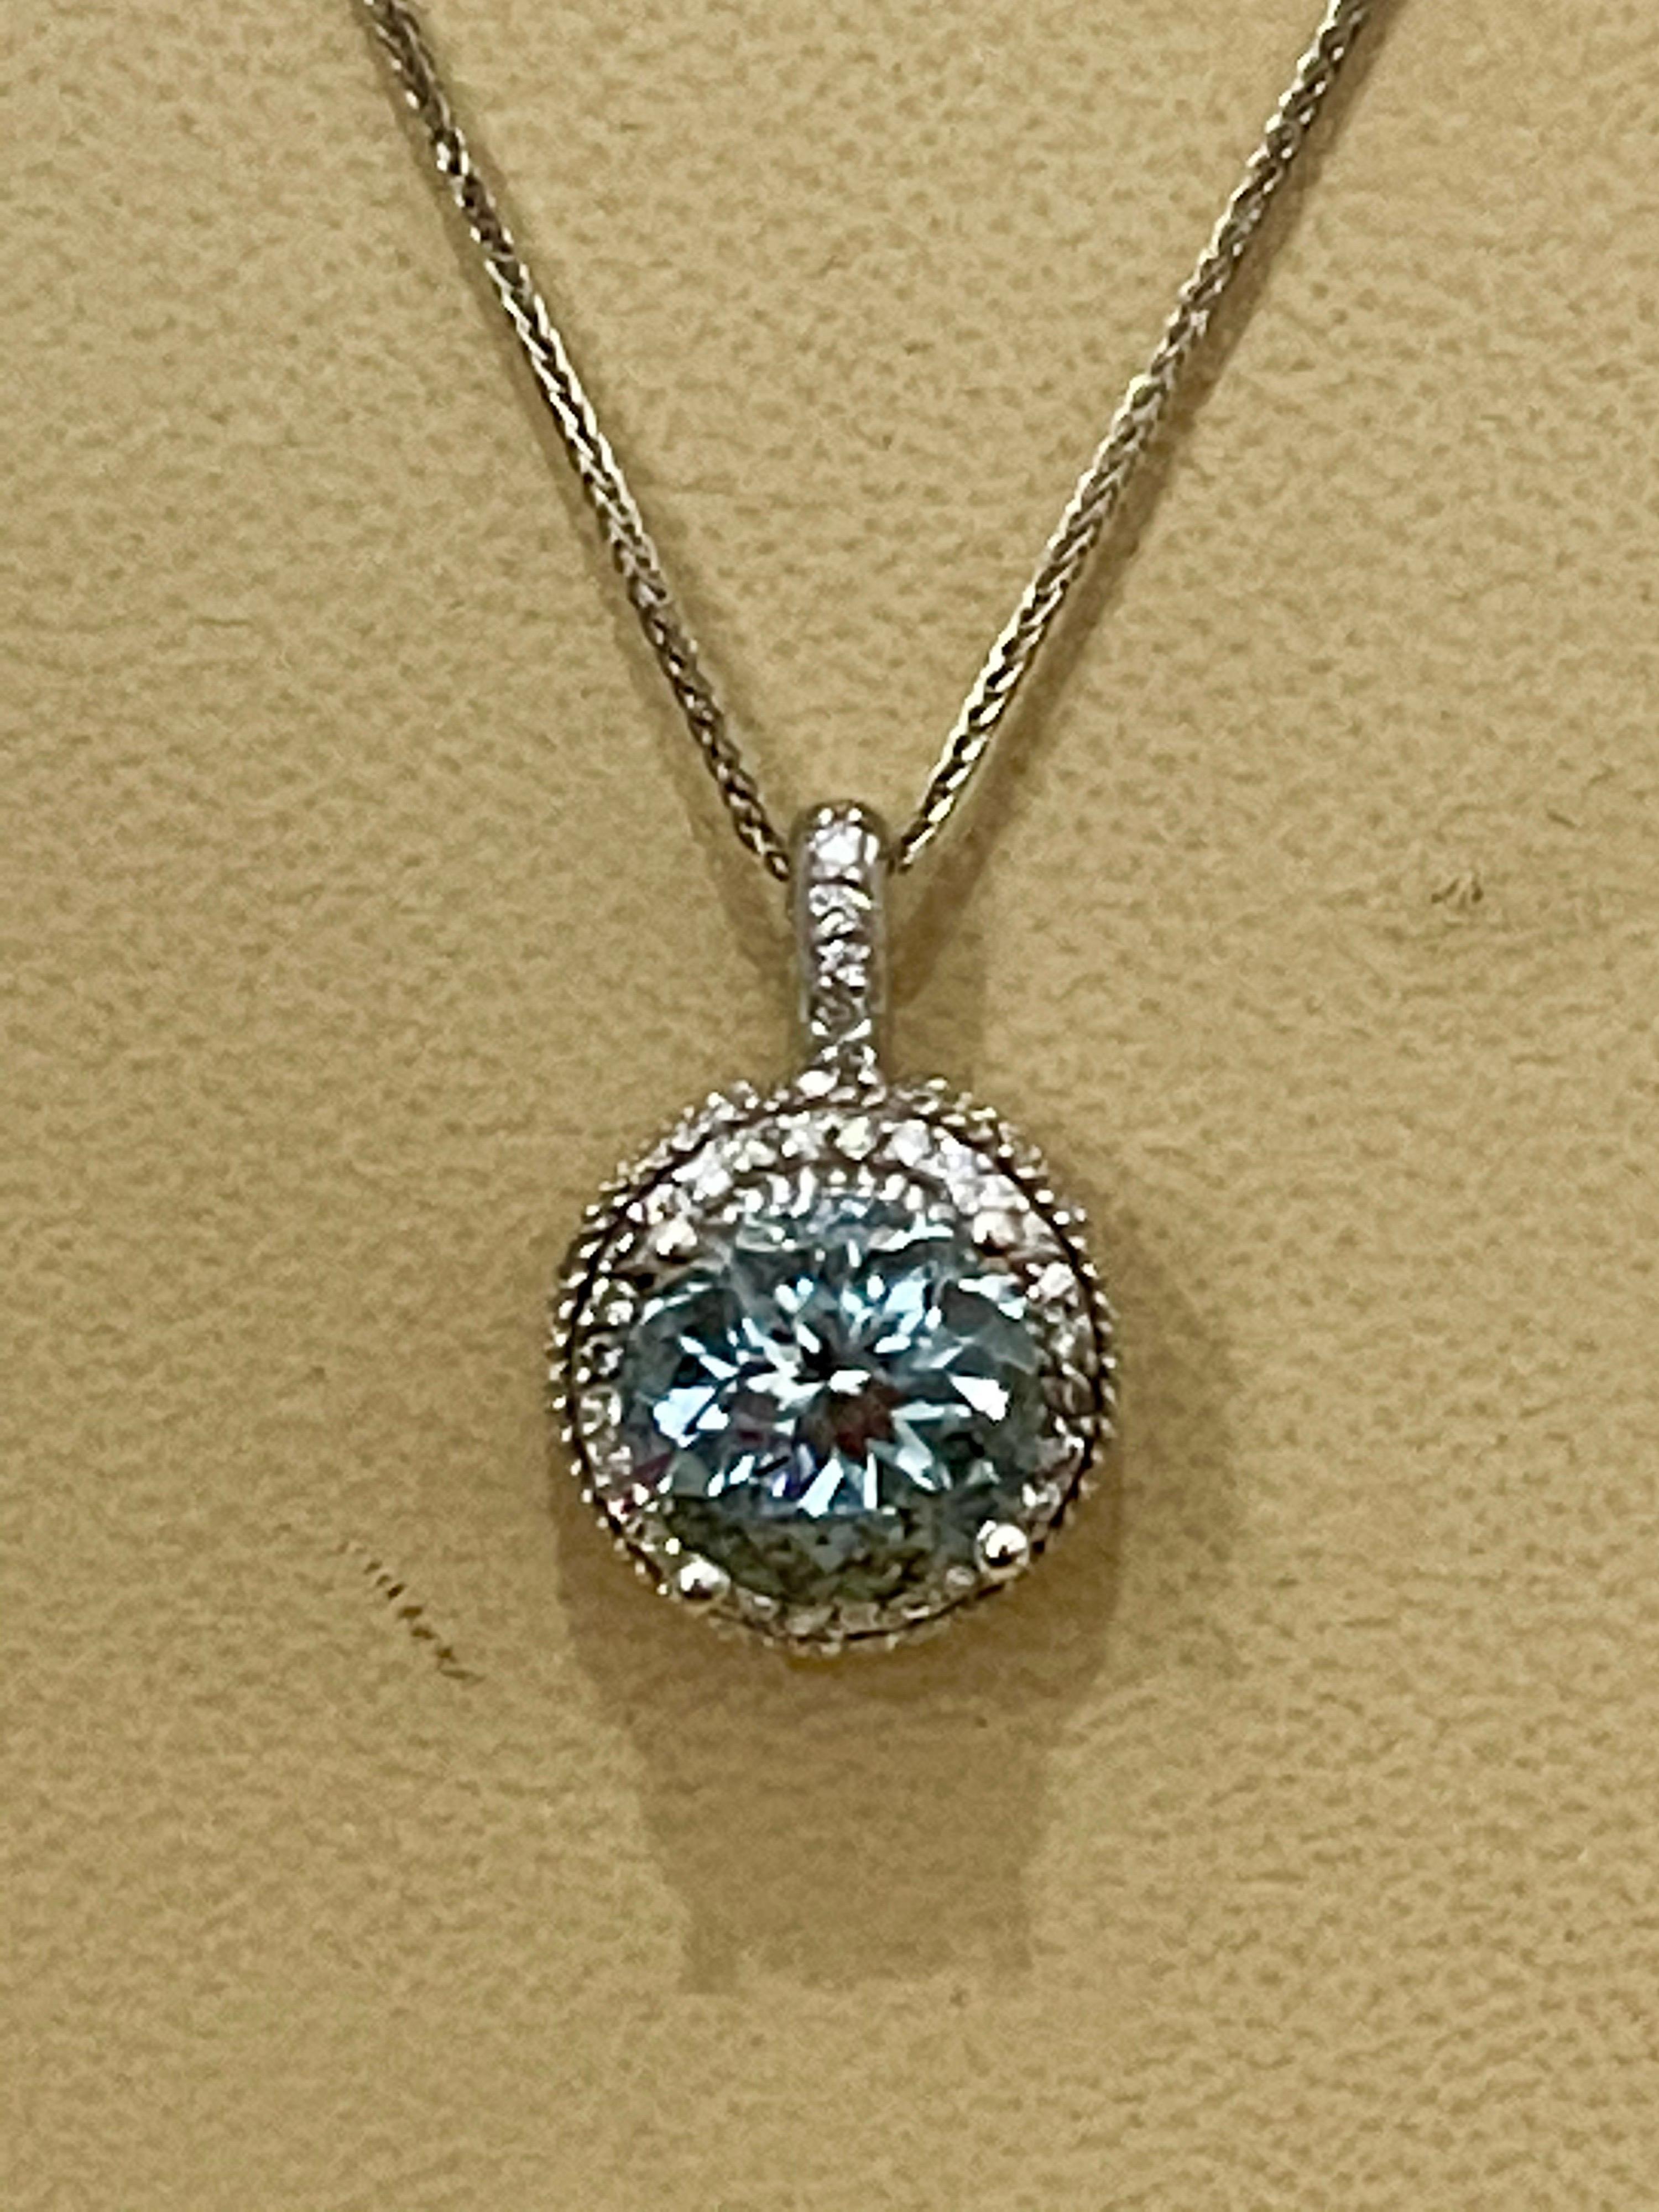 5.66 Carat Aquamarine and 1 Carat Diamond Pendant / Necklace 14 Karat White Gold
This spectacular Pendant Necklace consisting of a single round Shape Aquamarine exactly 5.66 Carat. The Aquamarine size 11.5 MM is surrounded by approximately 1.0